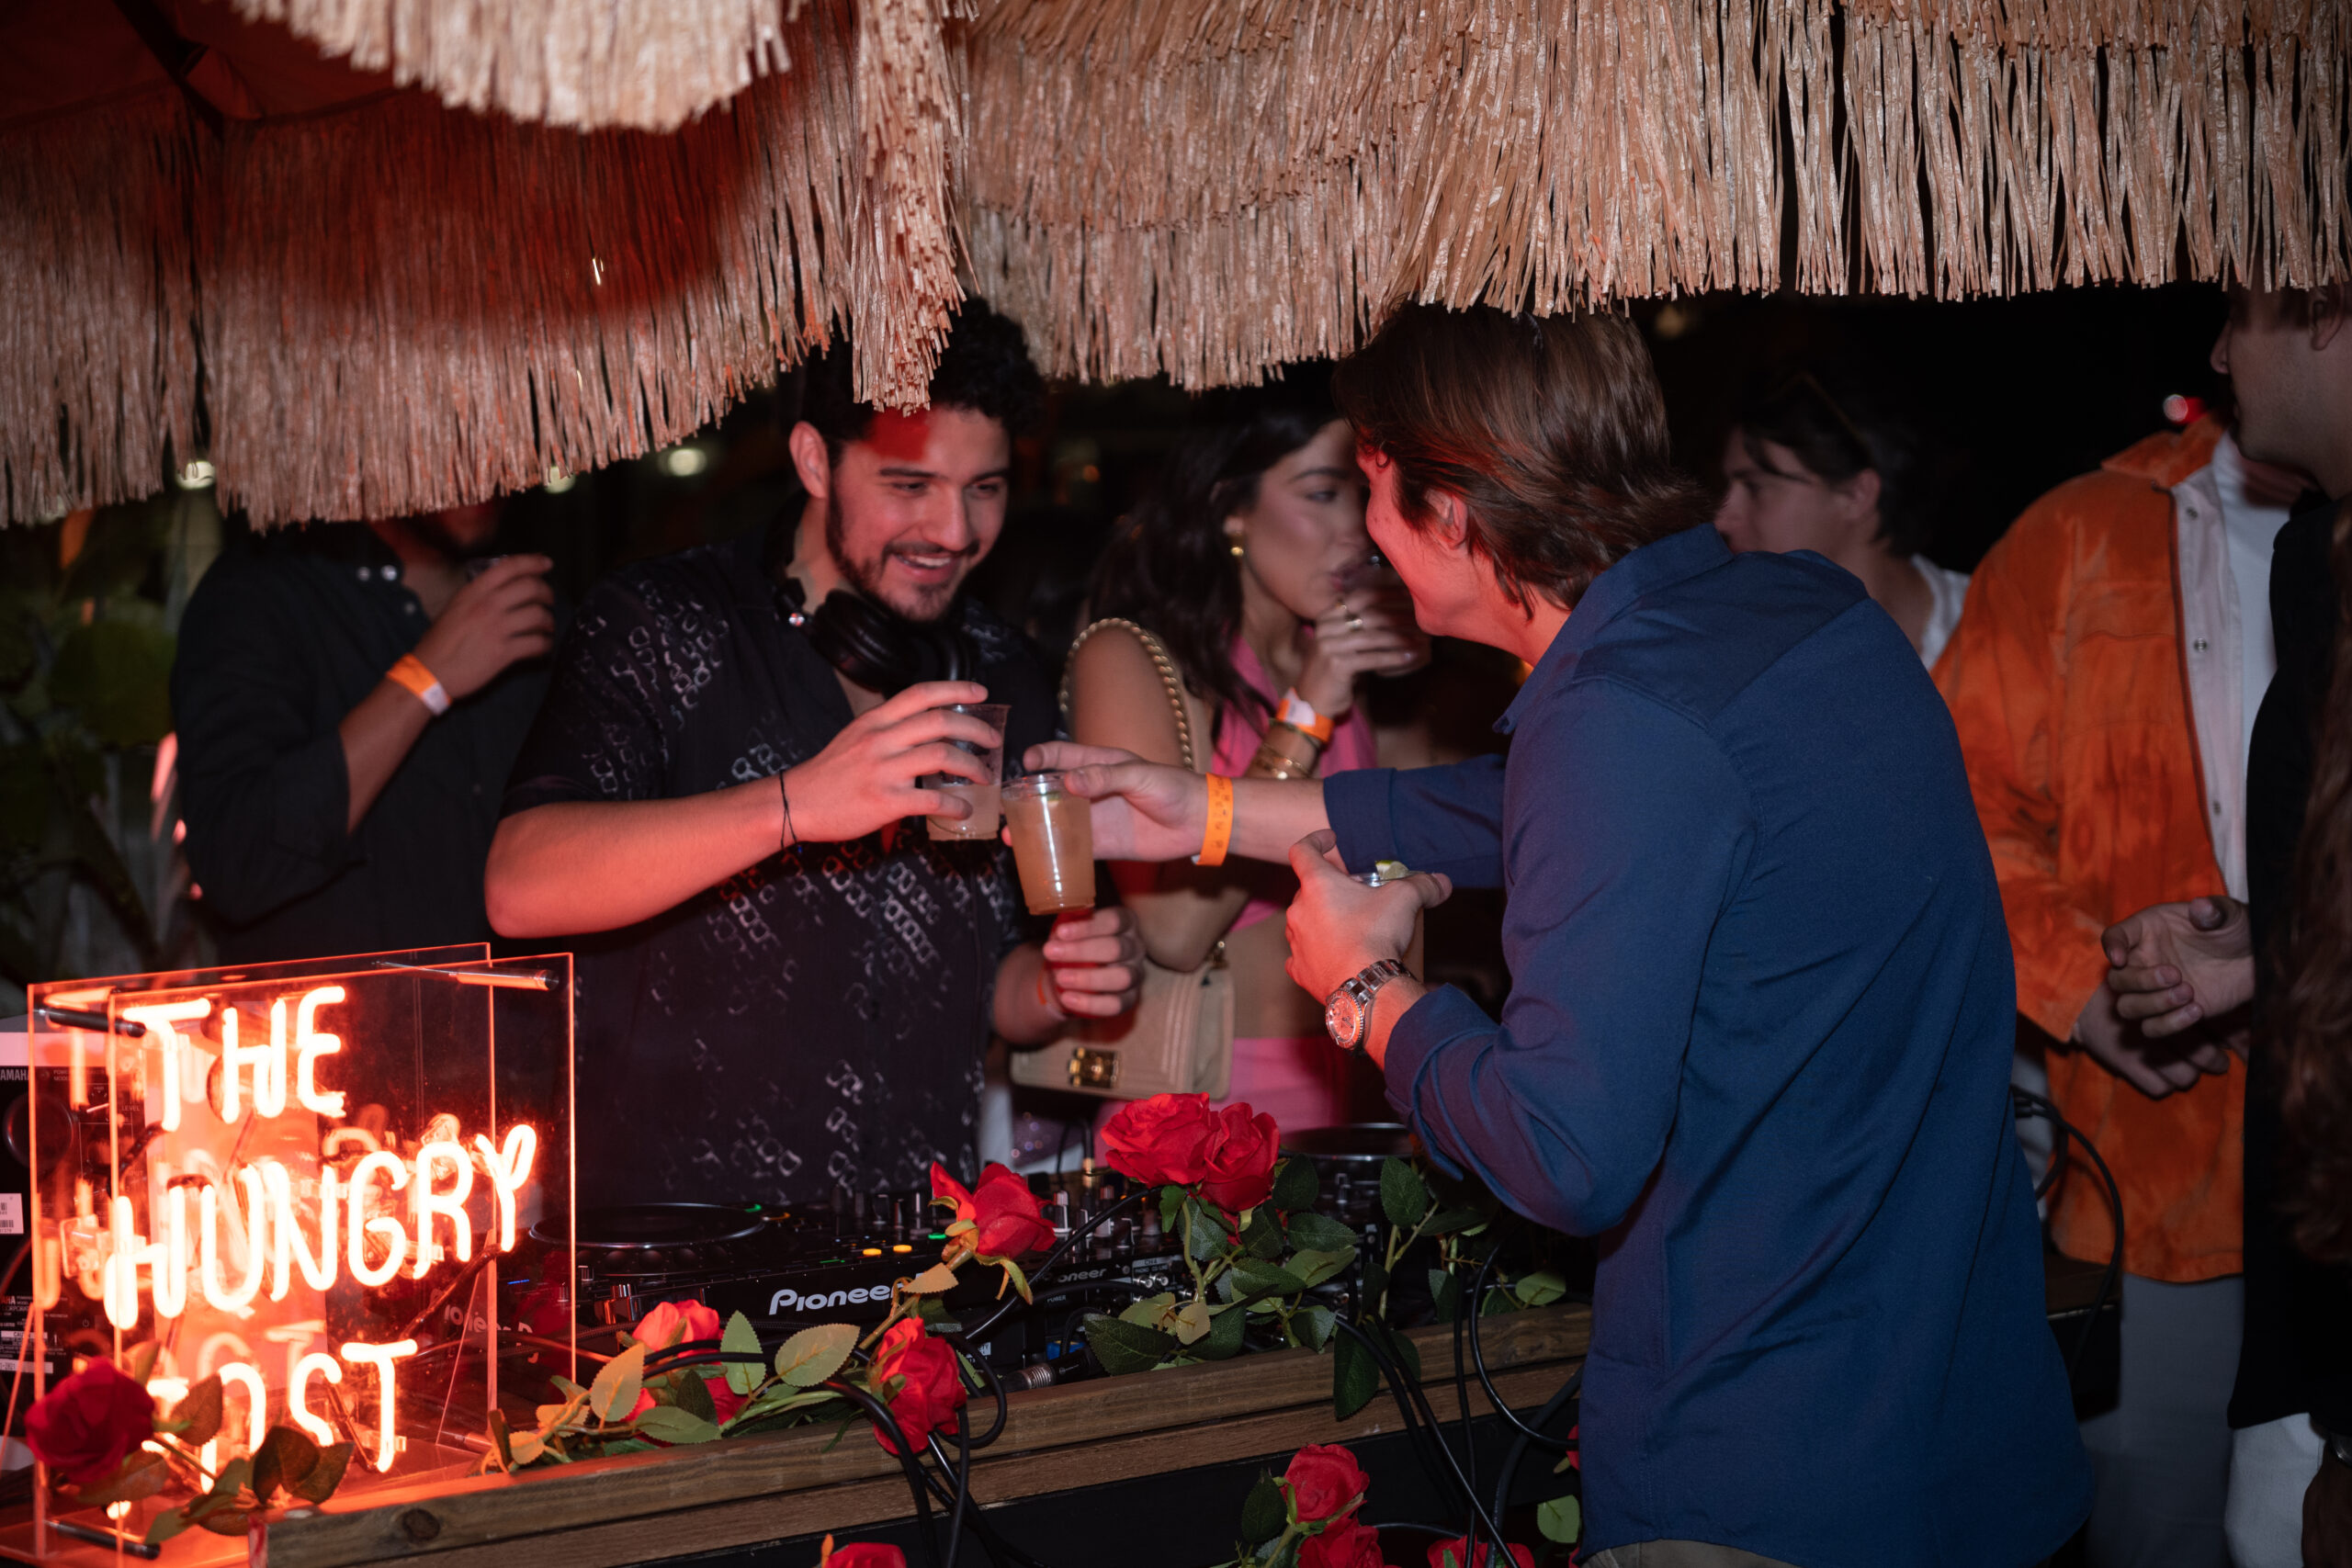 Hungry Post x Sipsmith Sunset Party at Arlo Wynwood in Miami